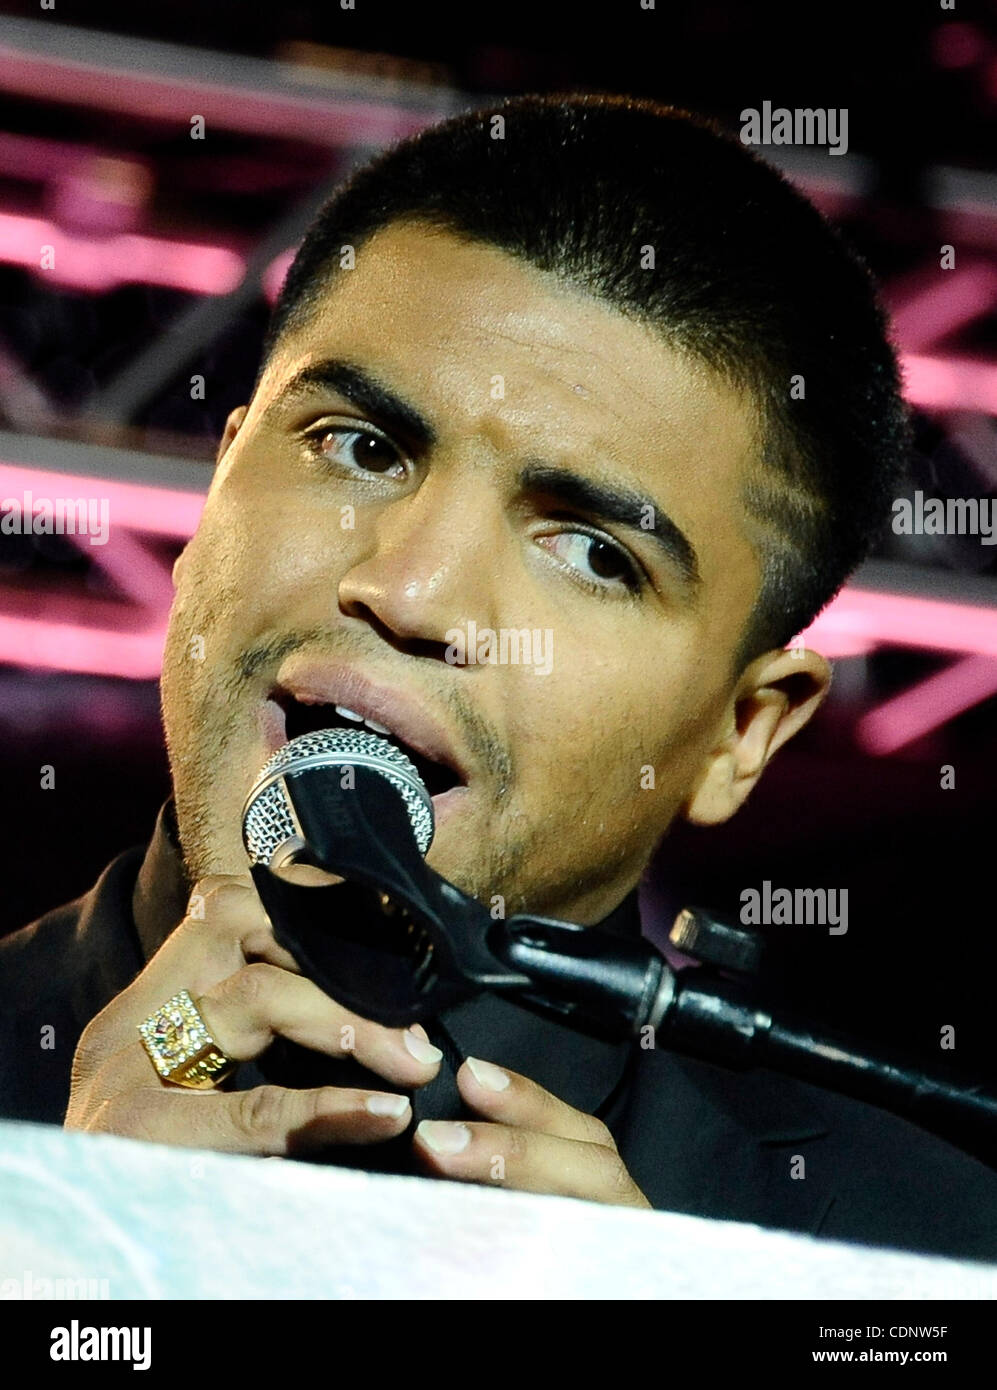 June 29,2011 - Los Angeles, California, USA. Victor Ortiz talks  at the Nokia center during a press conference on his upcoming fight with Floyd Mayweather Jr.  on Sept 17th at the MGM grand hotel in Las Vegas for the WBC welterweight title. (Credit Image: © Gene Blevins/ZUMAPRESS.com) Stock Photo